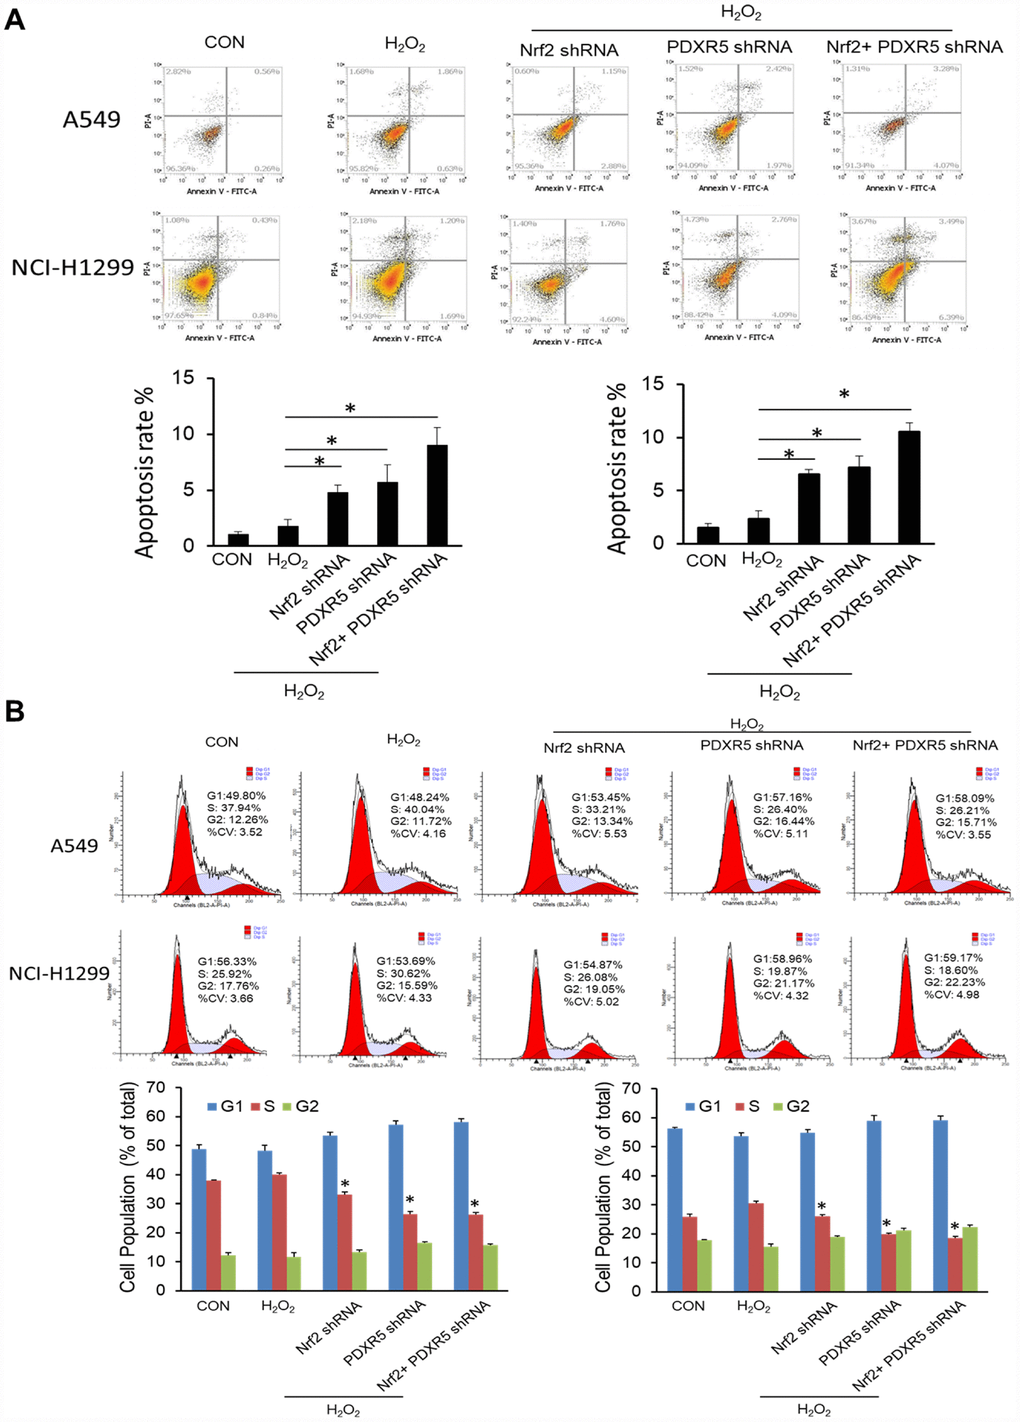 The effects of Nrf2 and/or PRDX5 shRNA on cell proliferation by EdU incorporation assay. (A) Nrf2 and/or PRDX5 shRNA significantly decreased cell proliferation ratio of A549 cells treated with H2O2 (*P B) Nrf2 and/or PRDX5 shRNA significantly decreased cell proliferation of NCI-H1299 cells treated with H2O2 (*P 